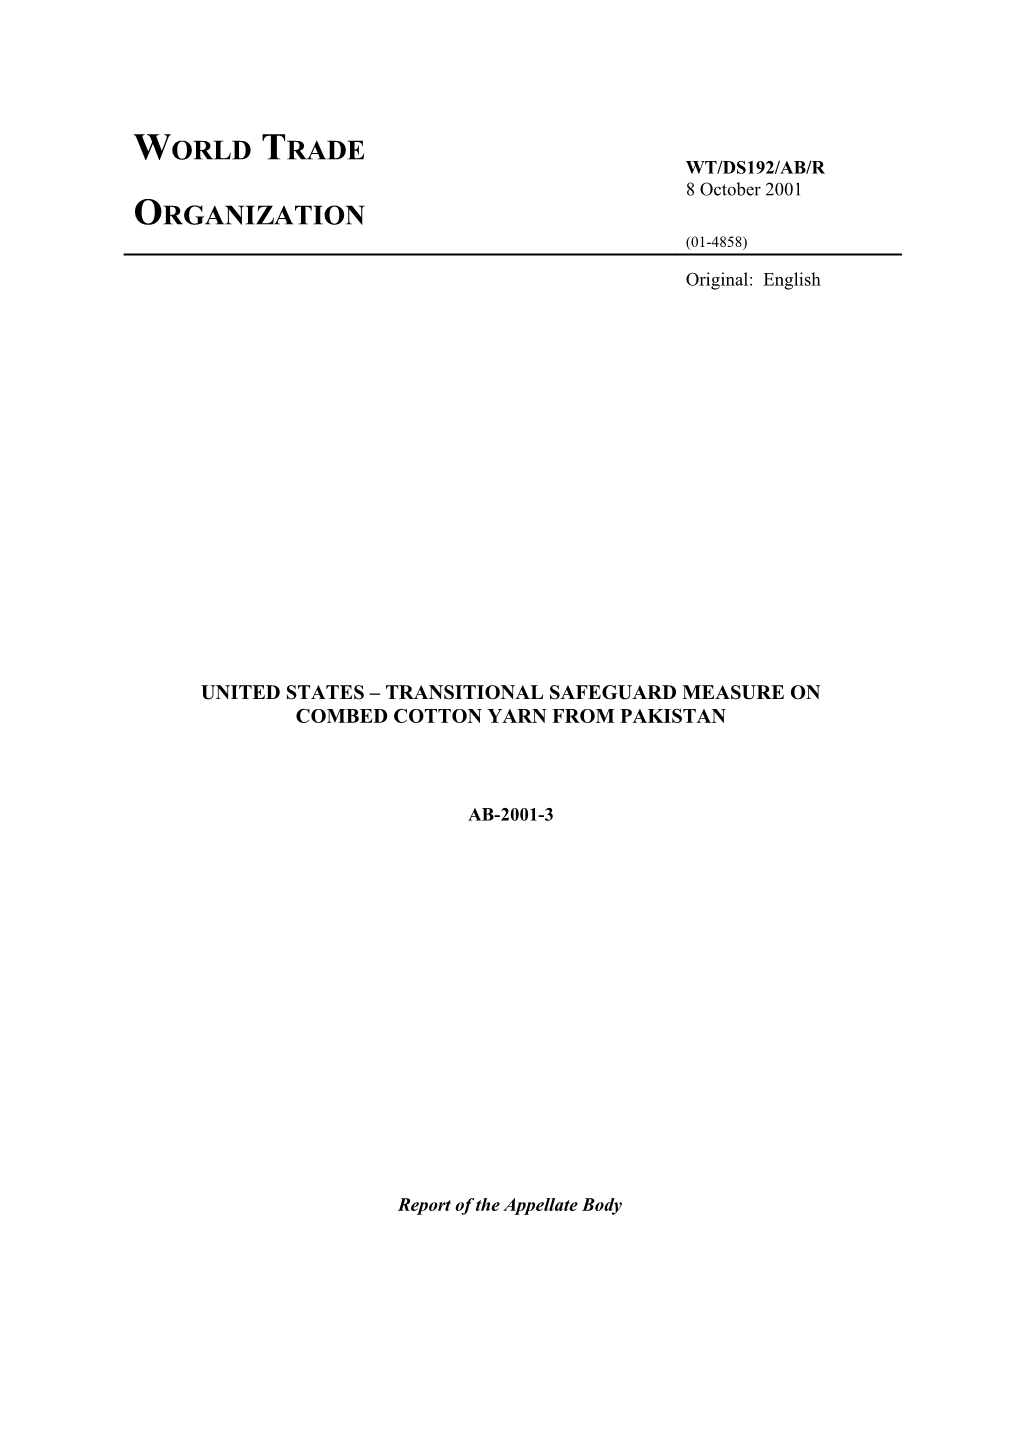 United States Transitional Safeguard Measure On